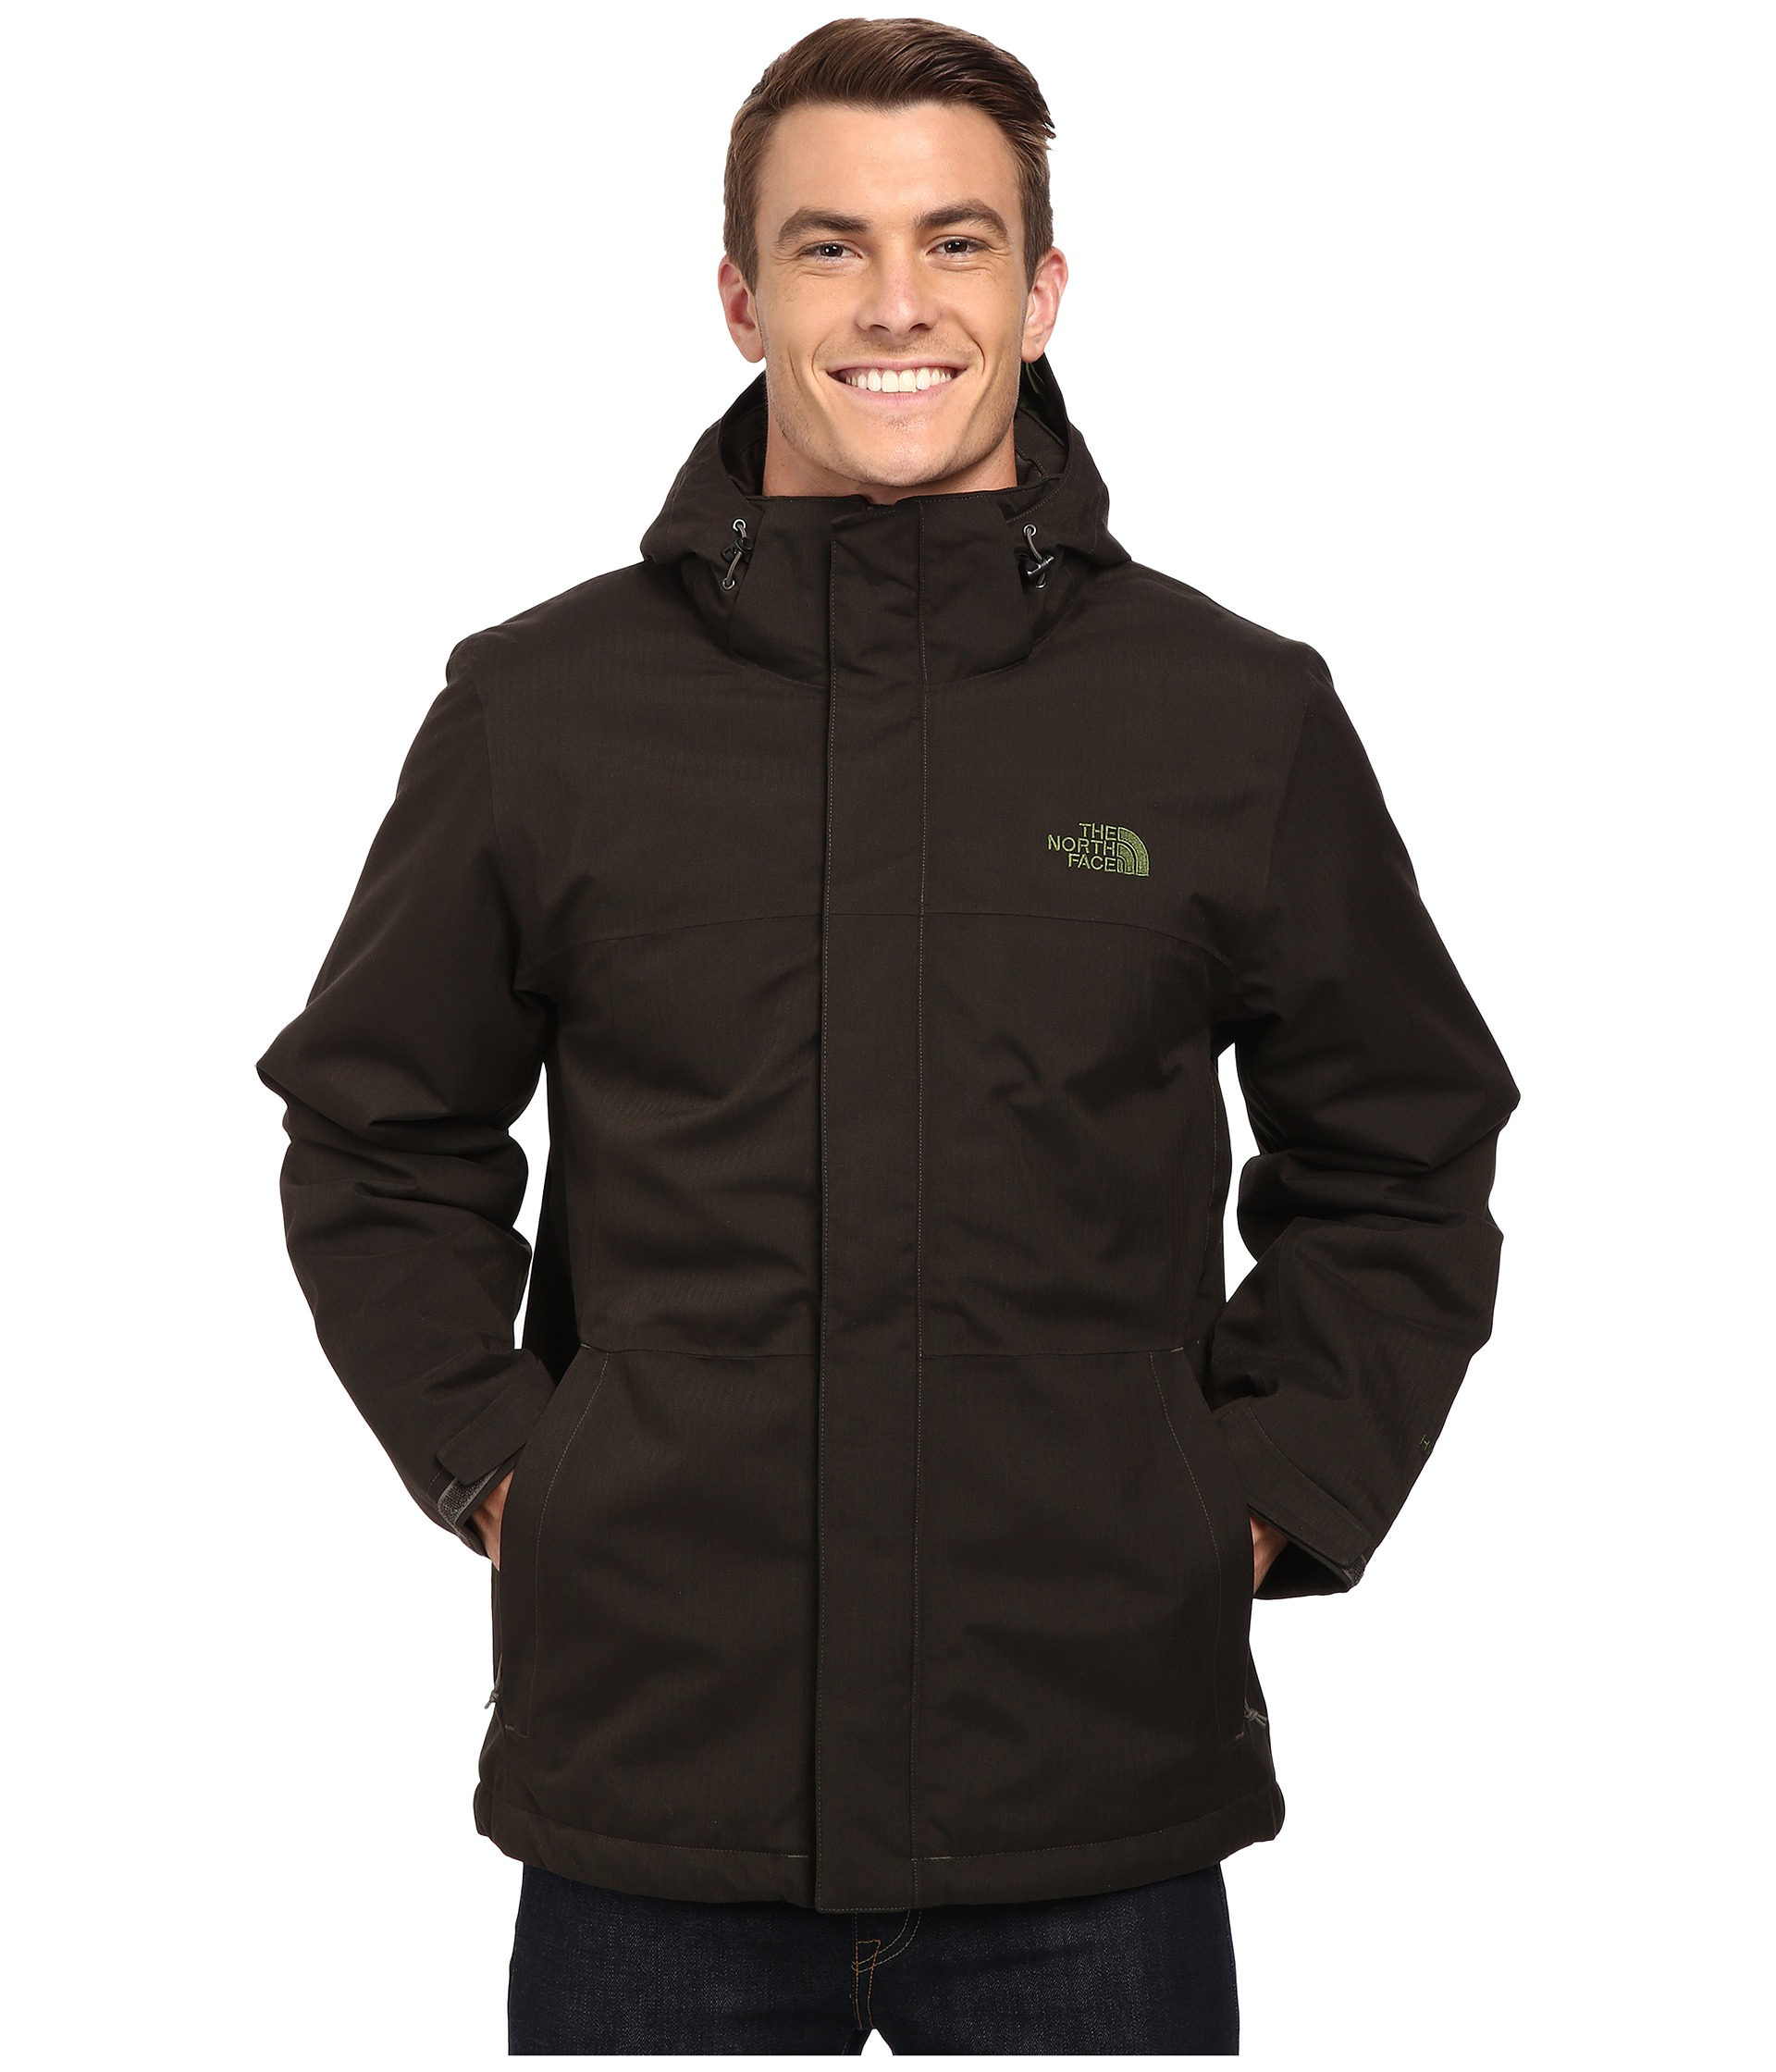 north face inlux jacket